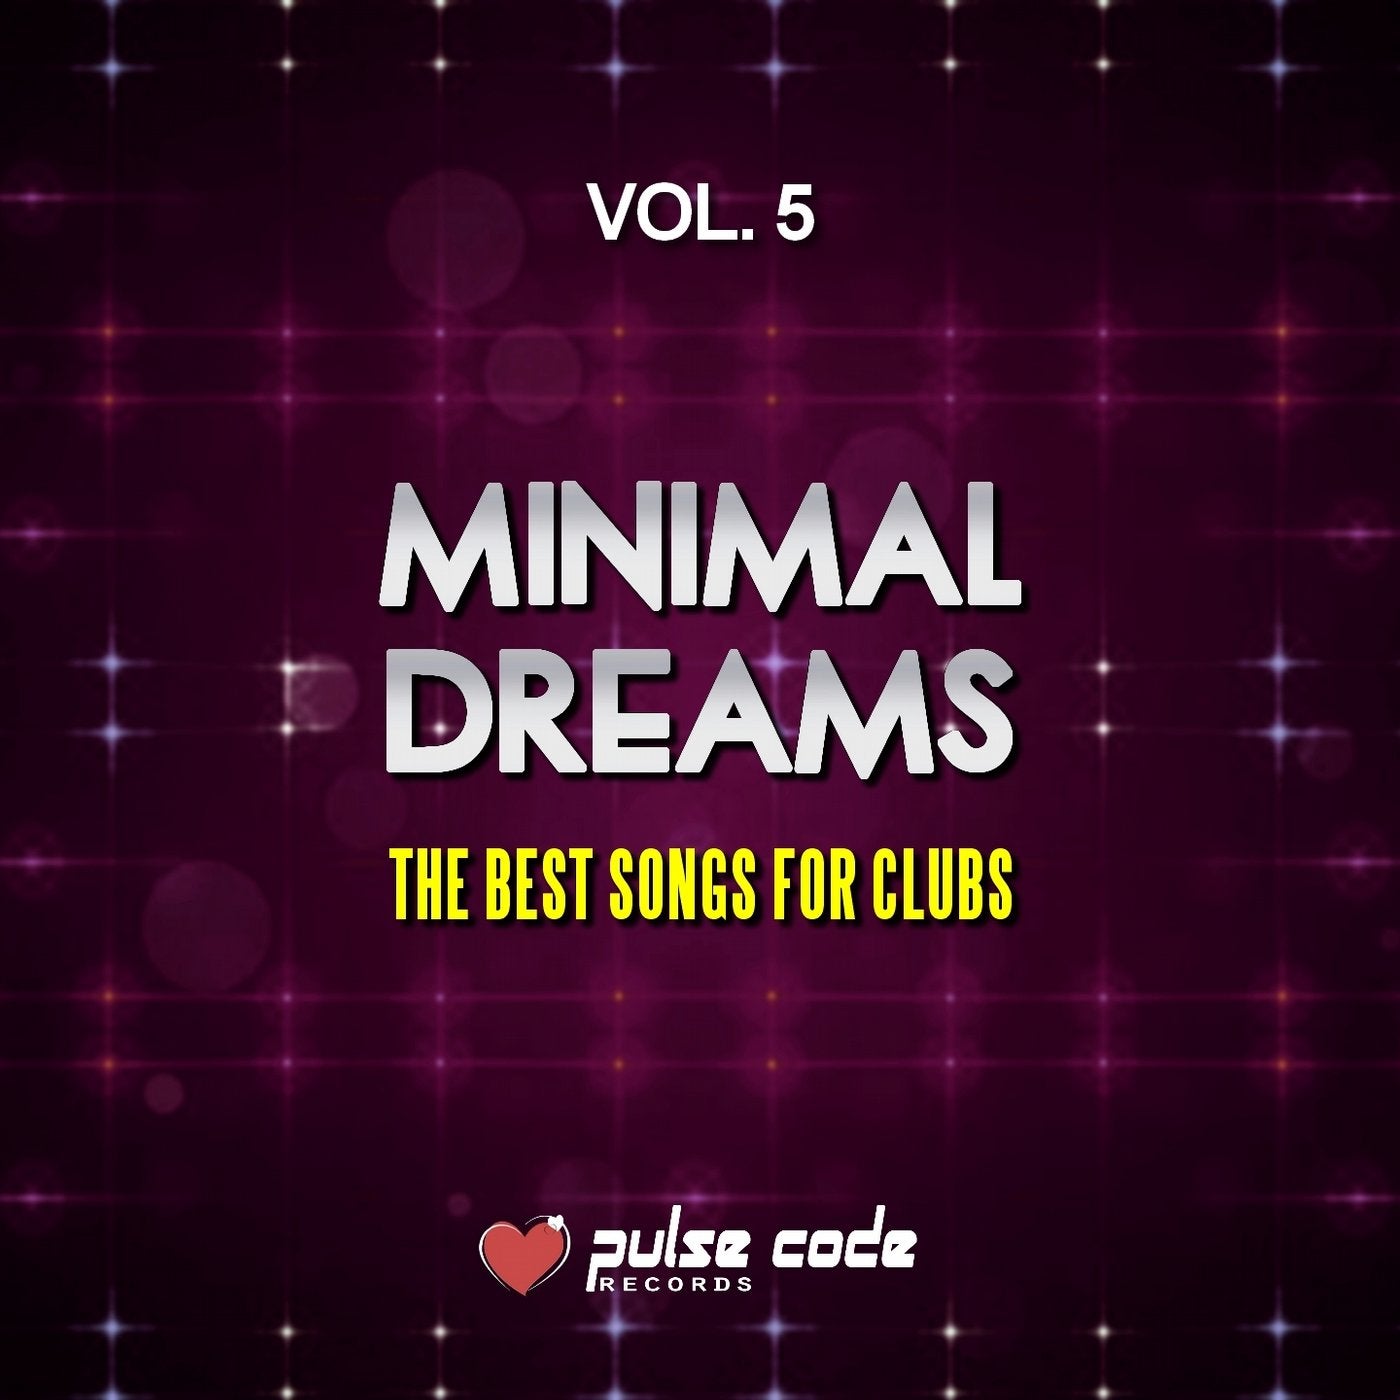 Minimal Dreams, Vol. 5 (The Best Songs for Clubs)